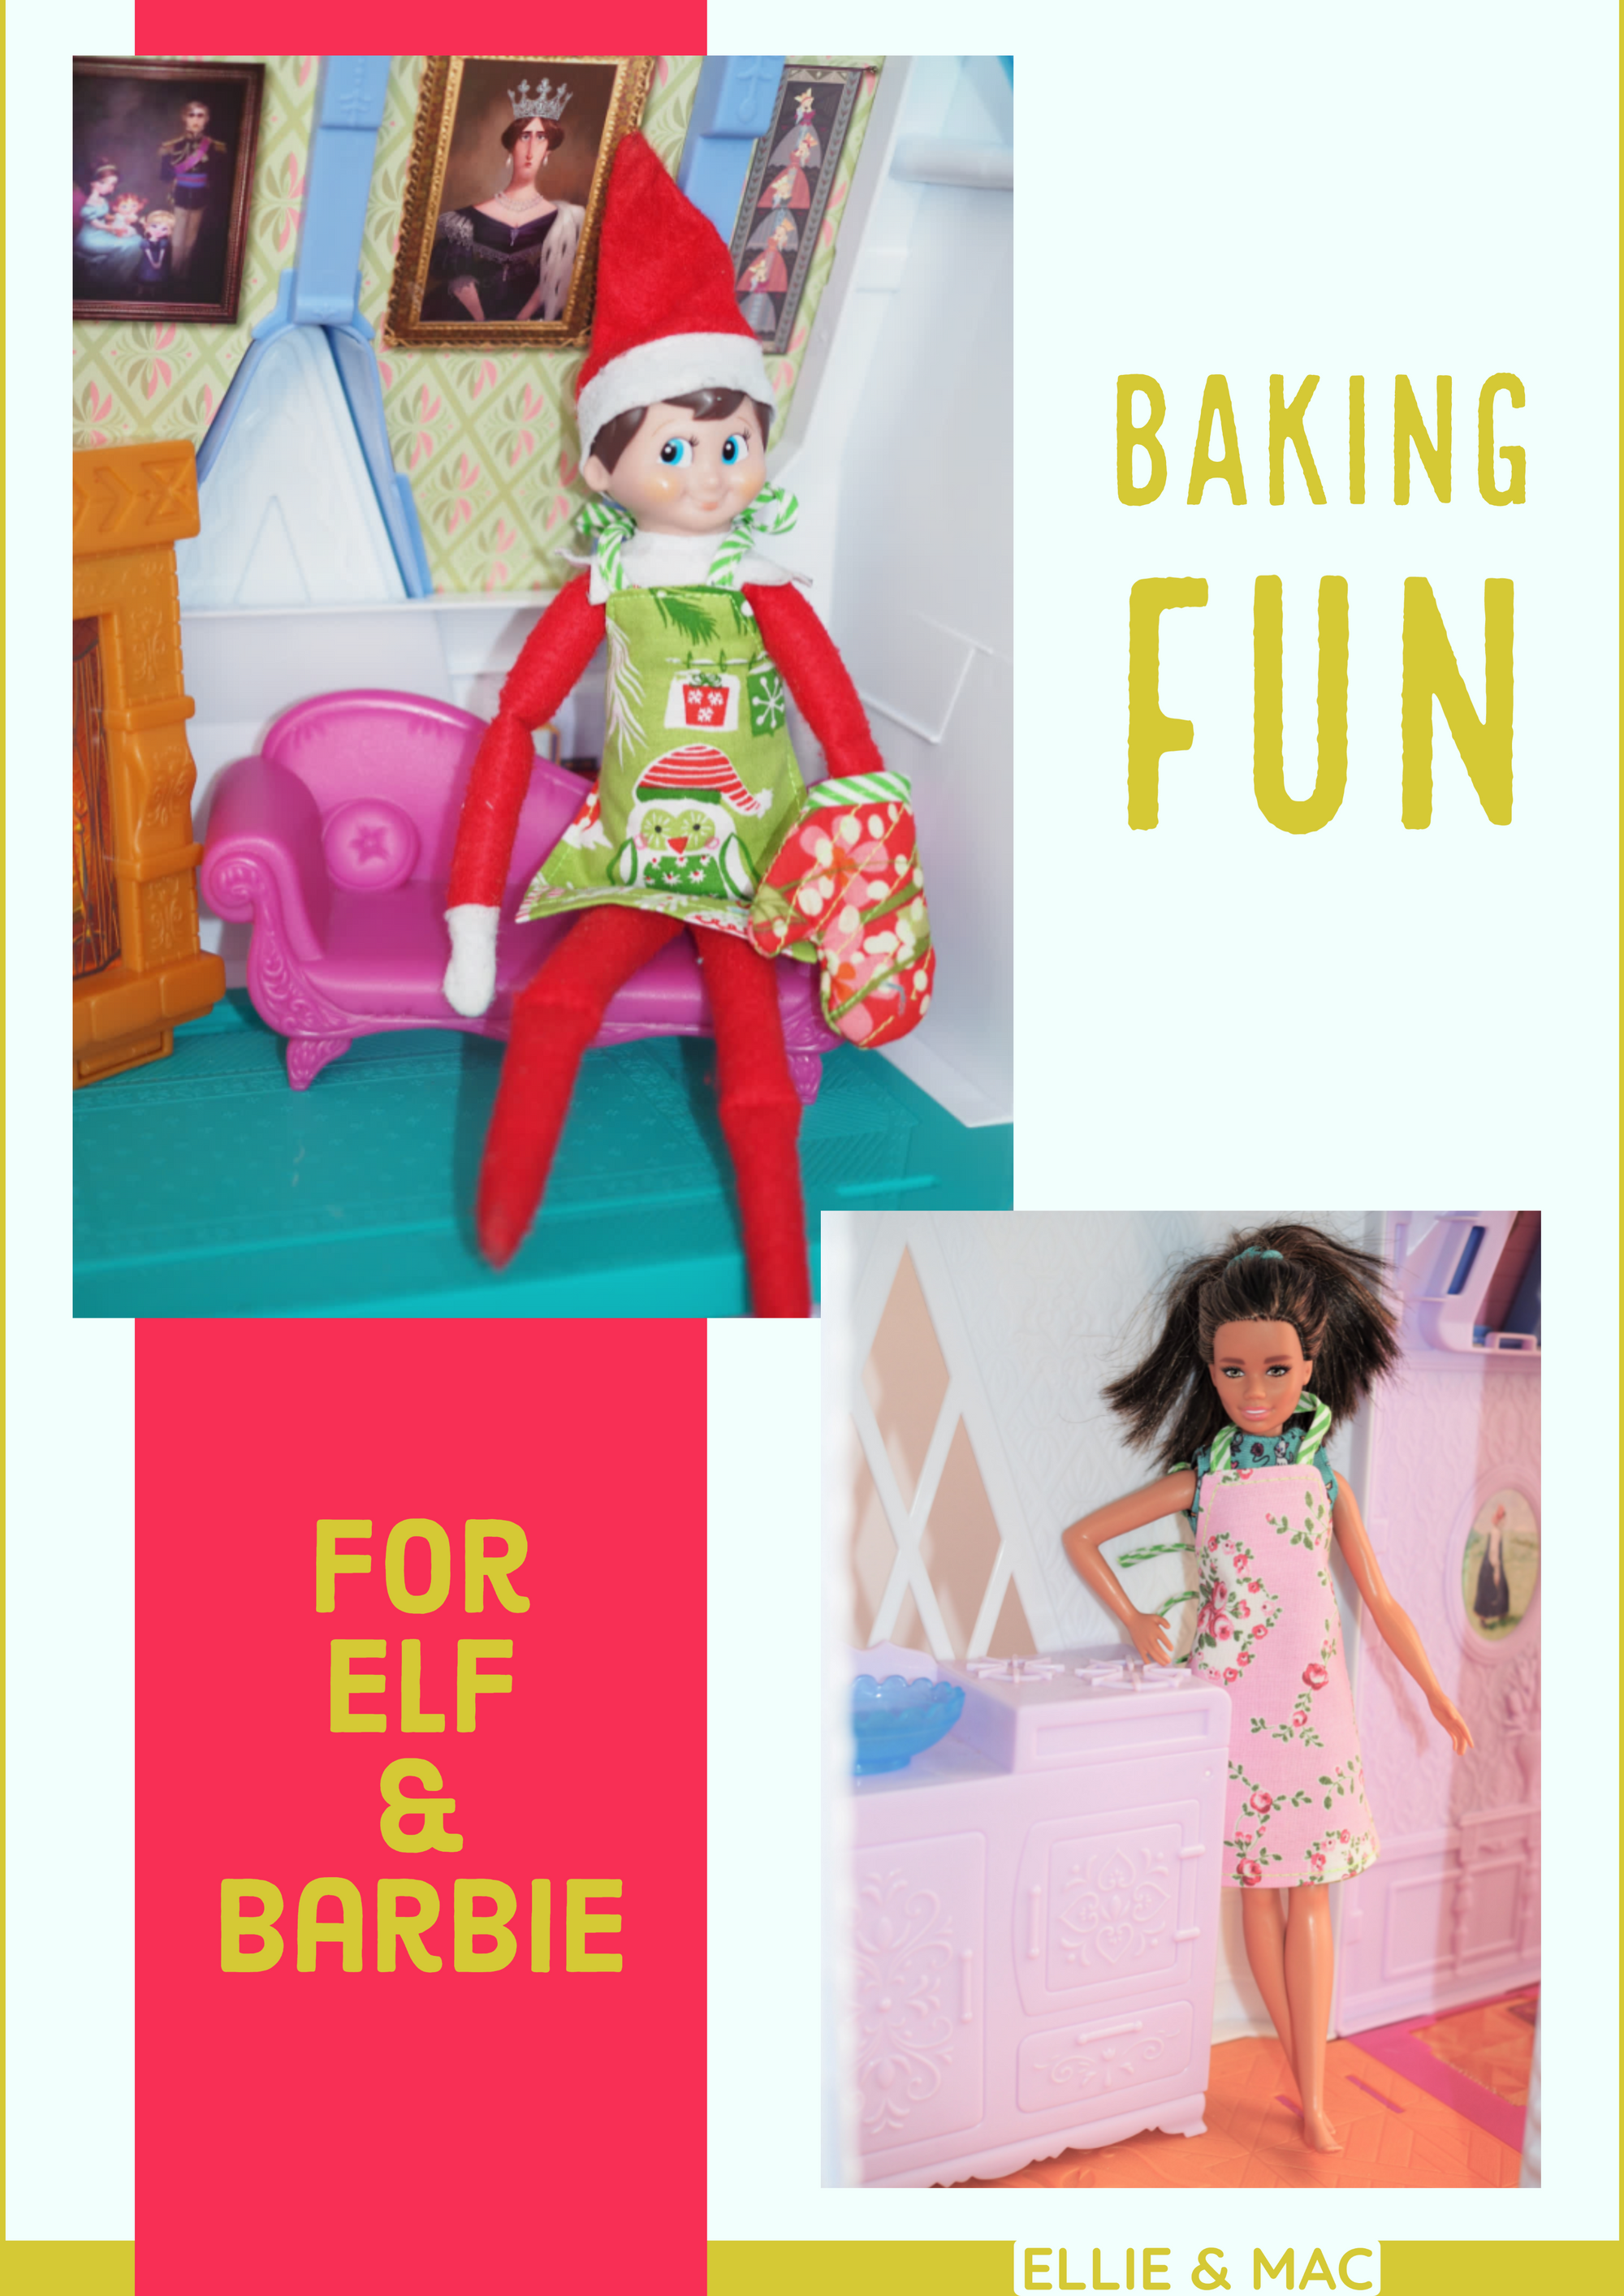 Baking Fun: Elf and Barbie Sized Apron and Oven Mitts